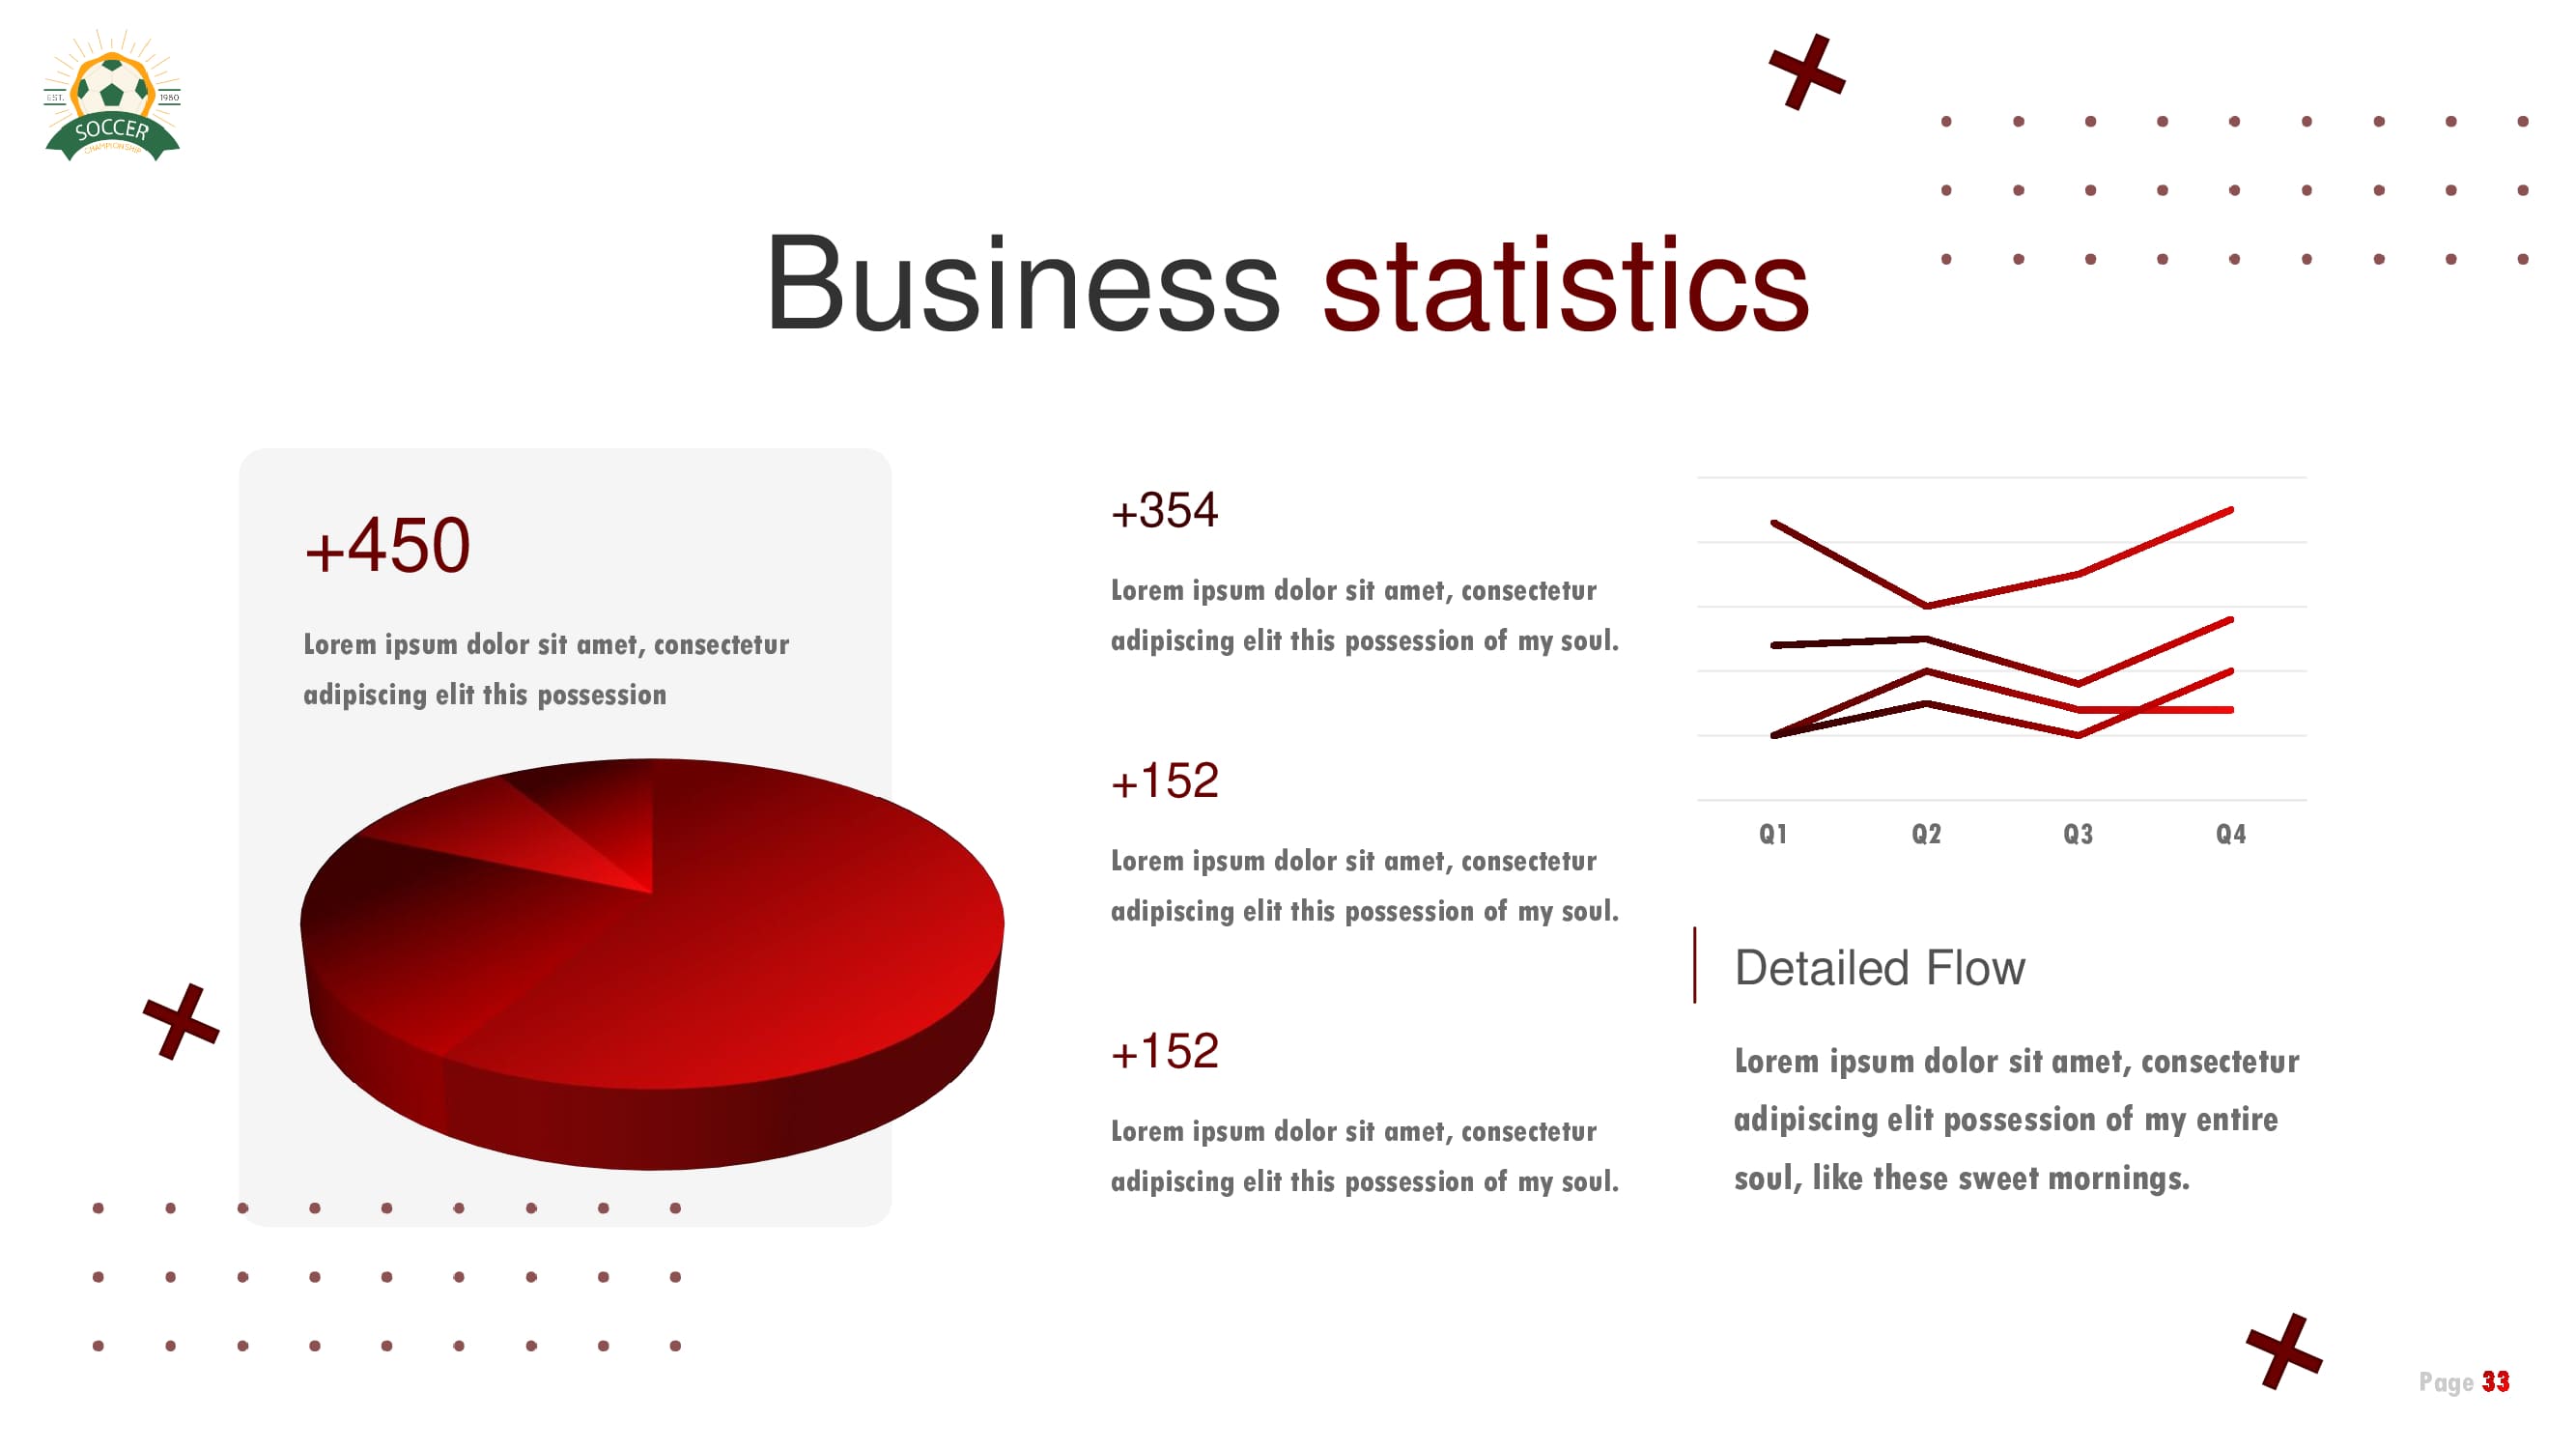 A slide for business statistics with chart and diagram.